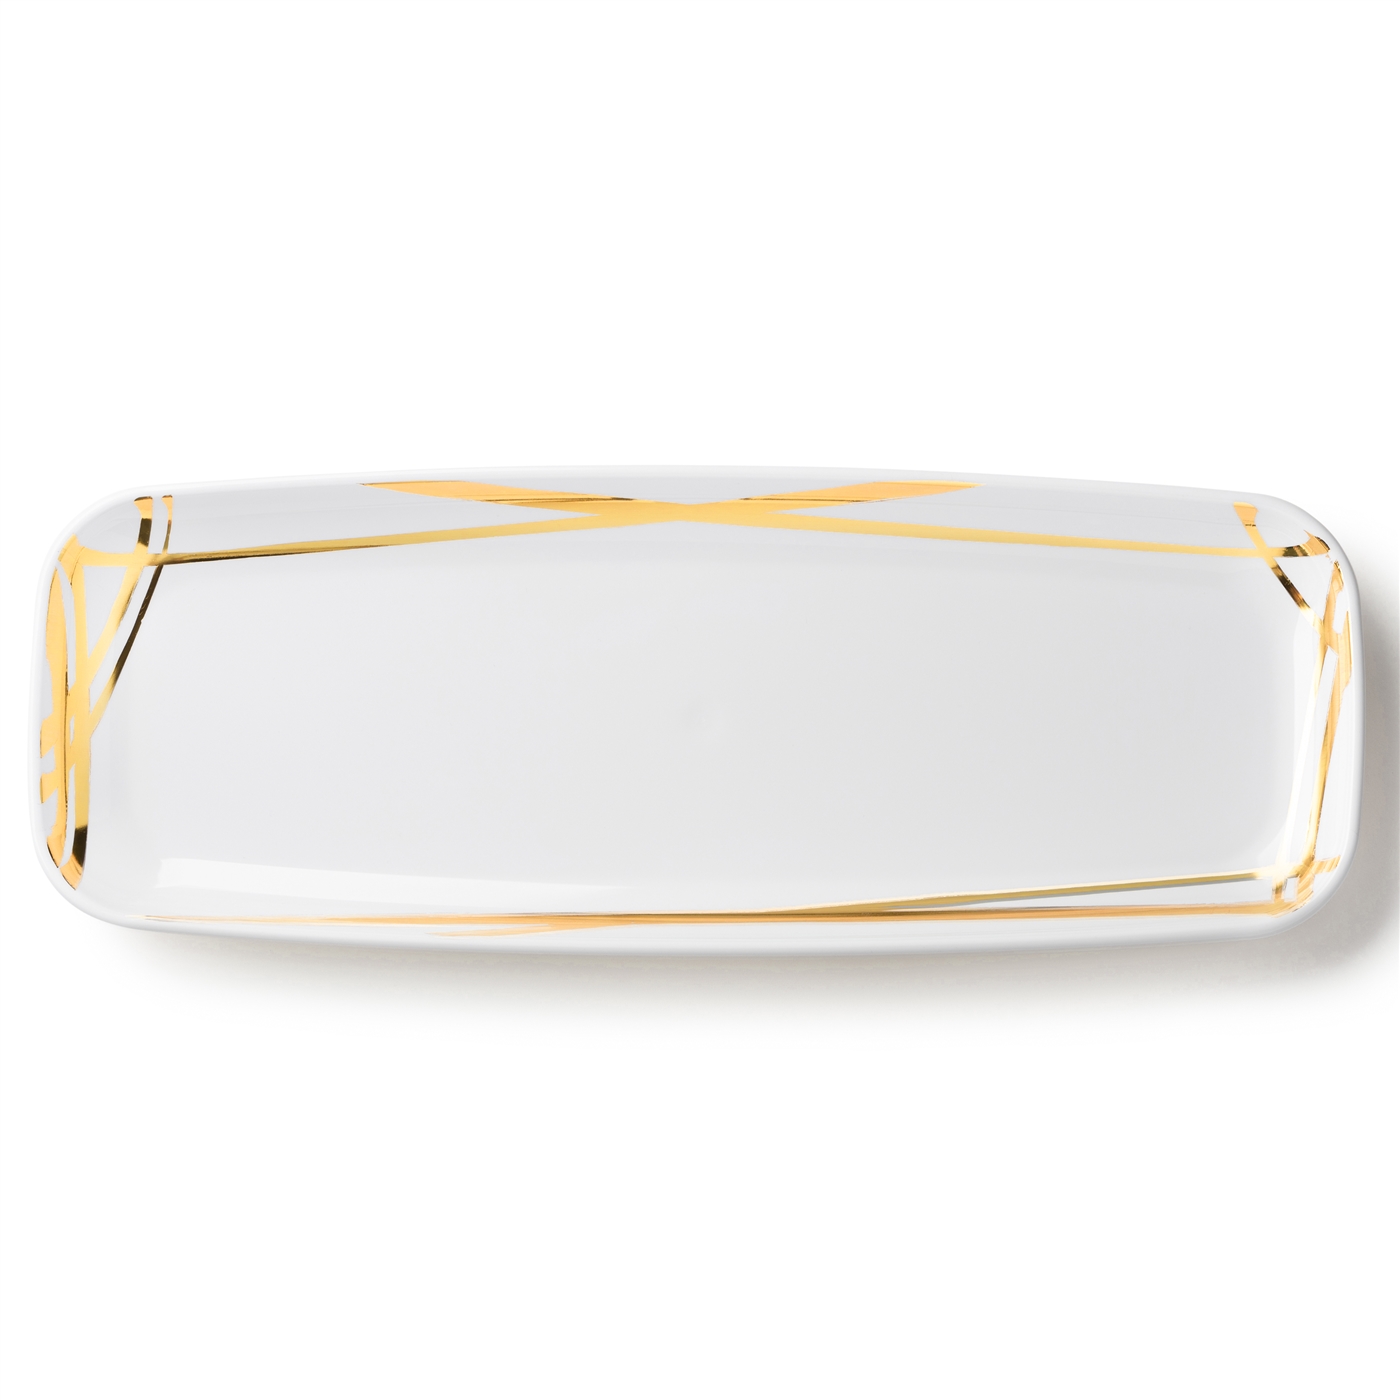 Decor Twist Collection White & Gold Oval Serving Tray